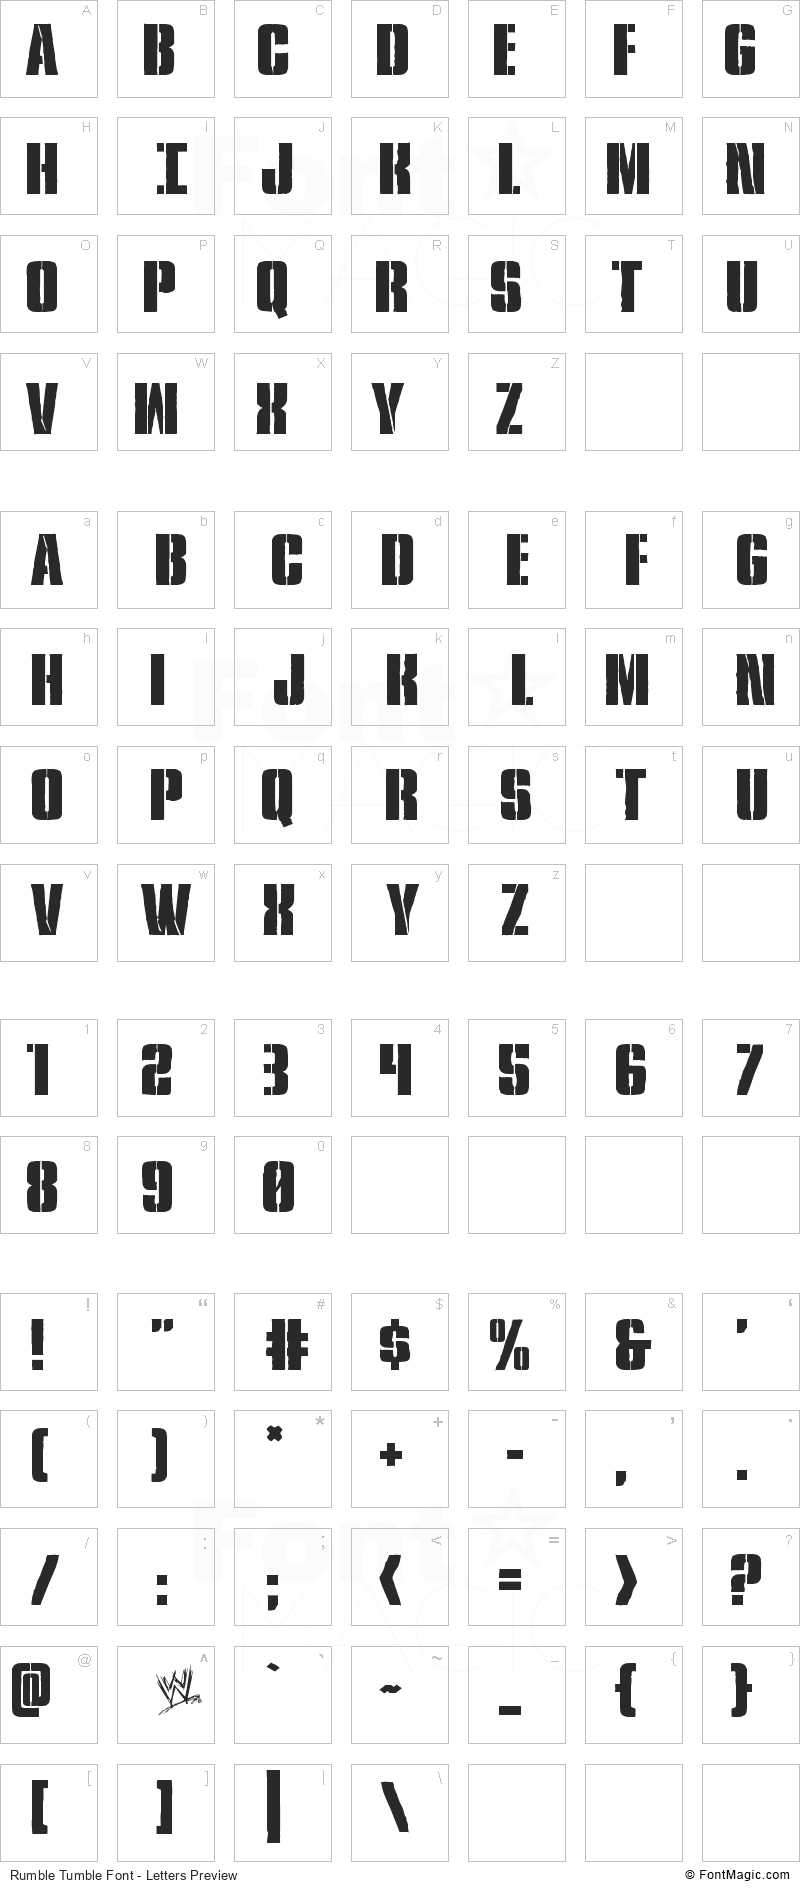 Rumble Tumble Font - All Latters Preview Chart